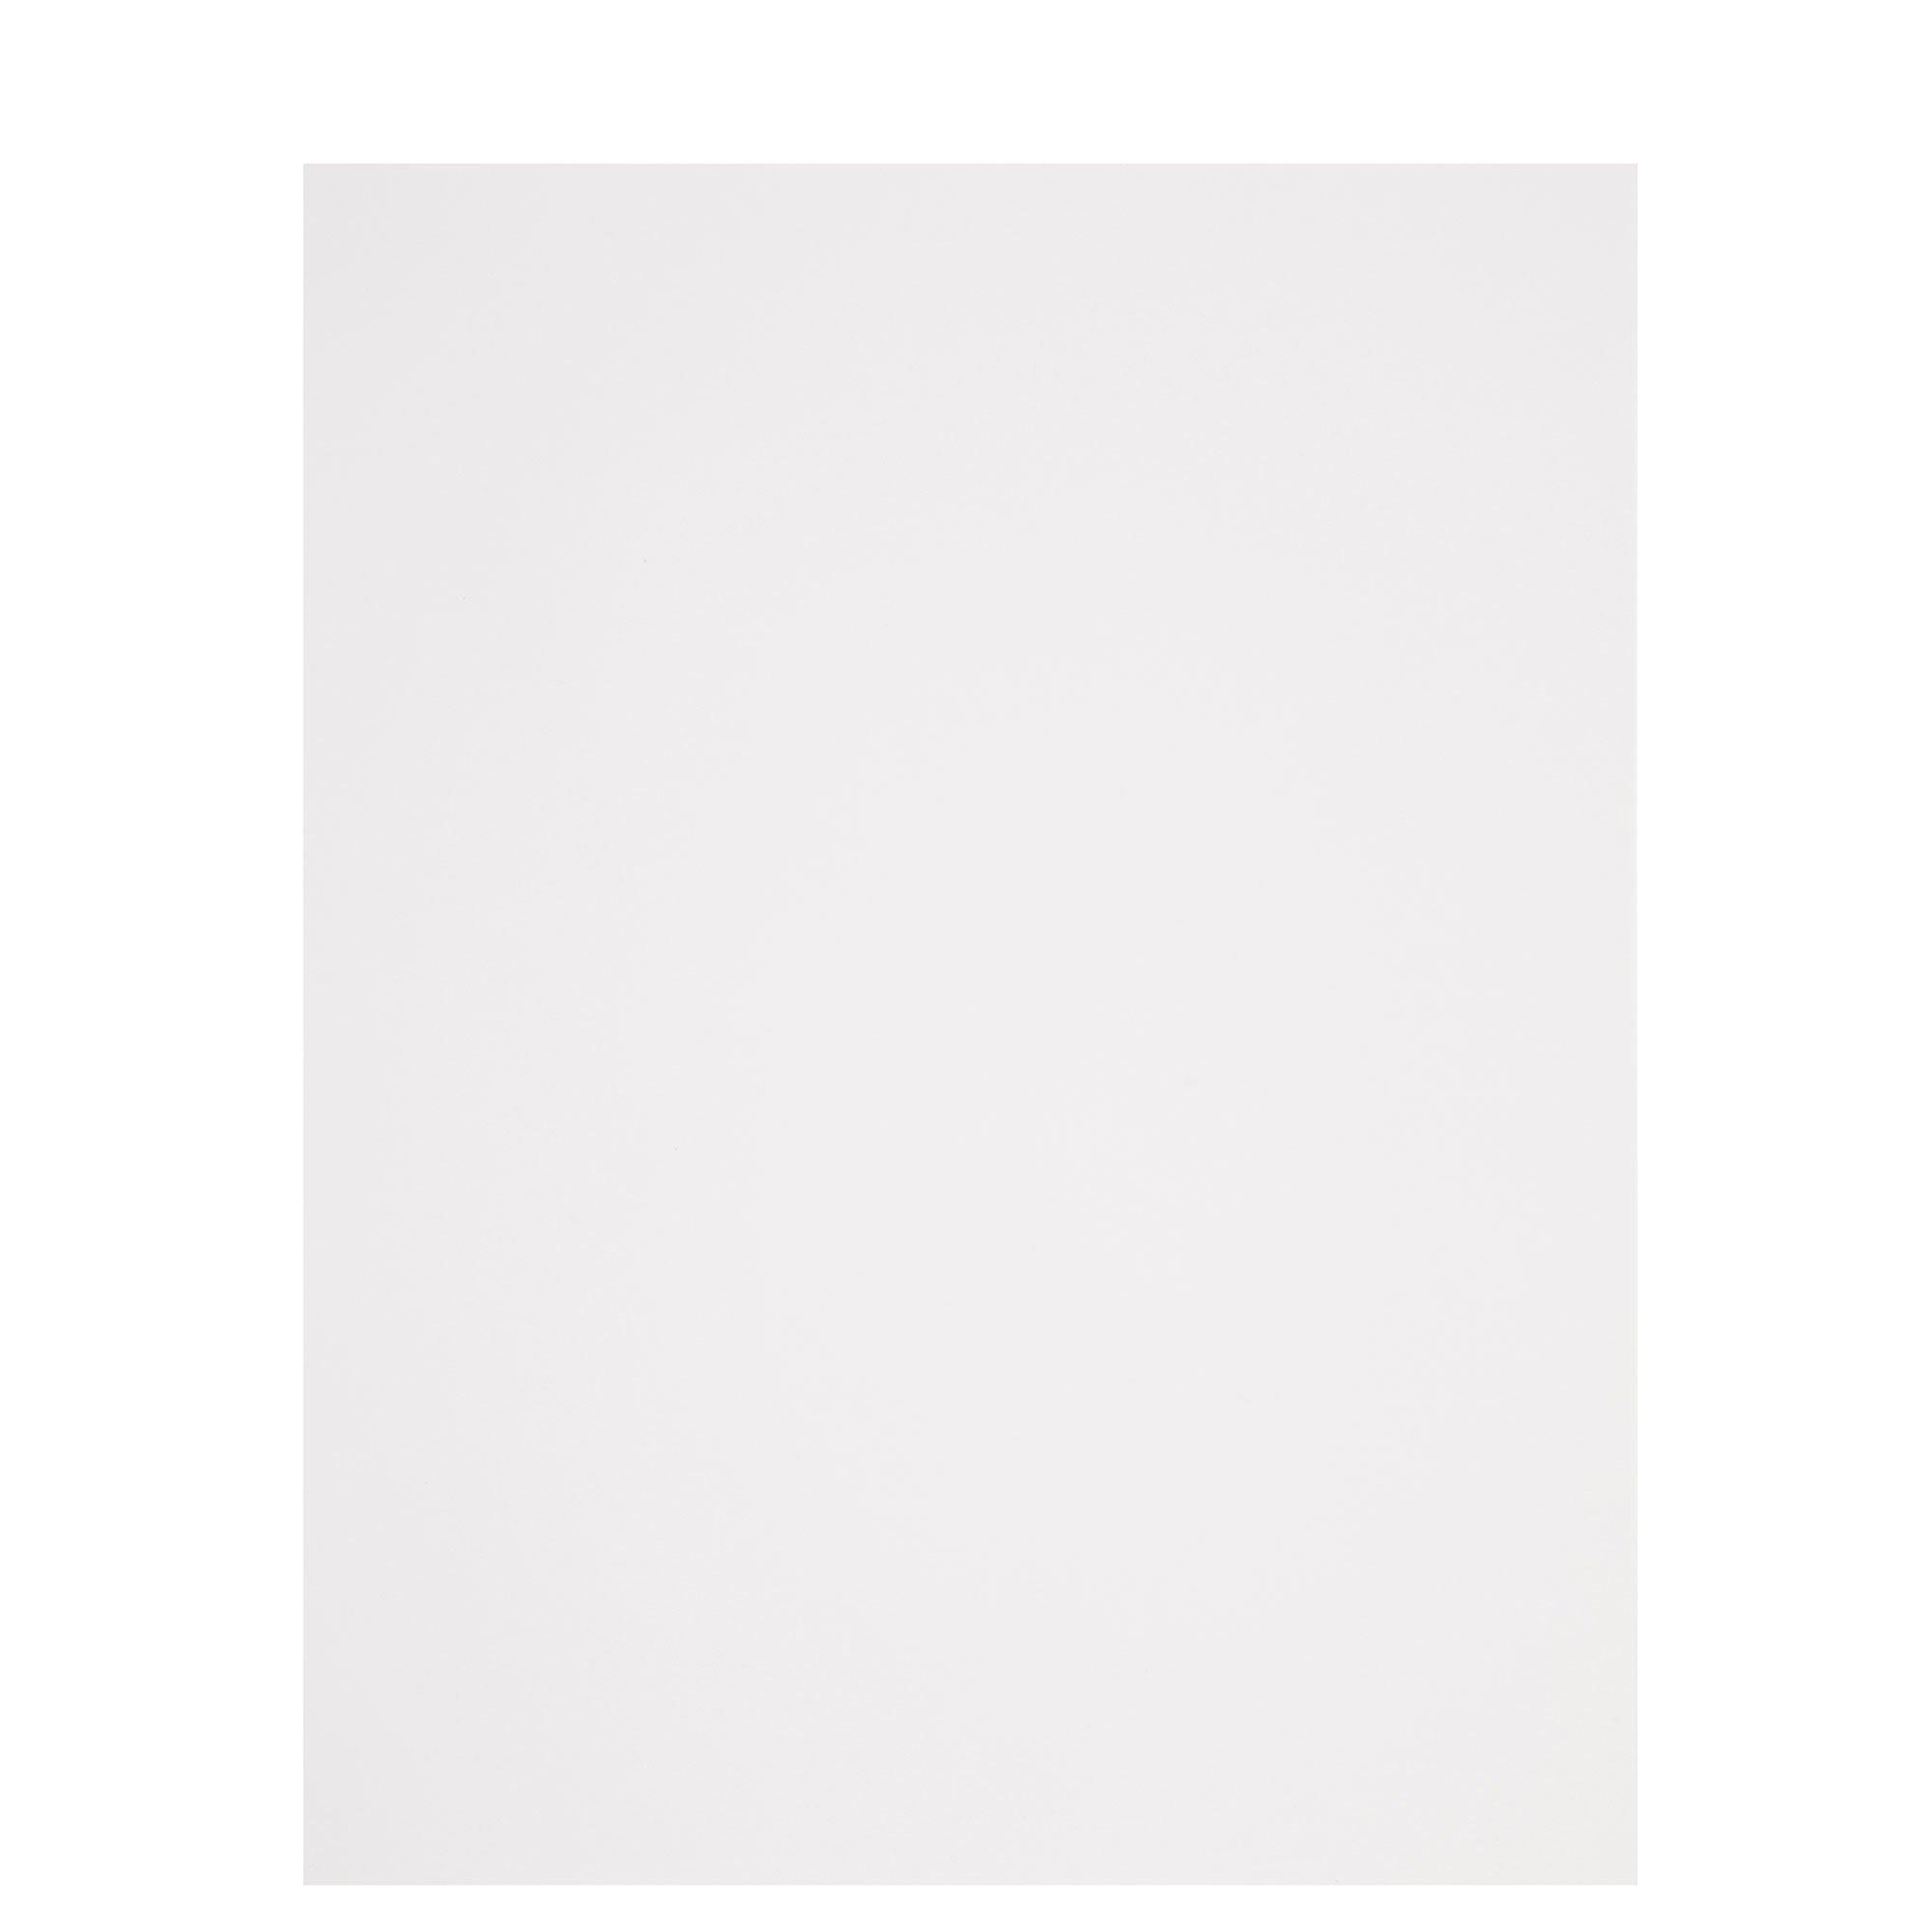 Paper Accents™ White Card Stock - 25 Sheets, 8.5 x 11 in - Ralphs